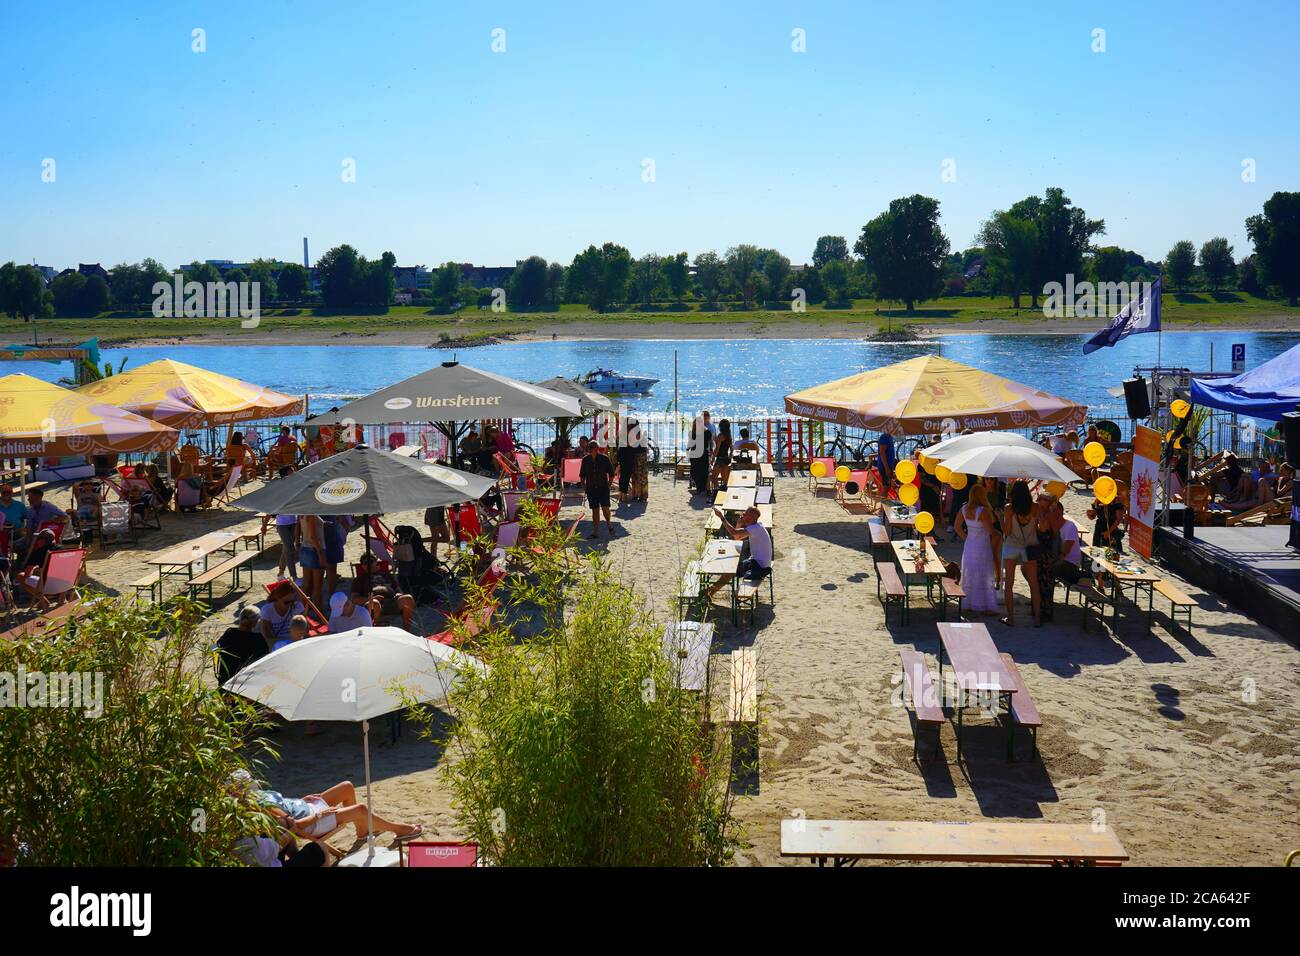 So-called 'Stadtstrand' (city beach) at the Rhine river in Düsseldorf on a beautiful summer day. Stock Photo